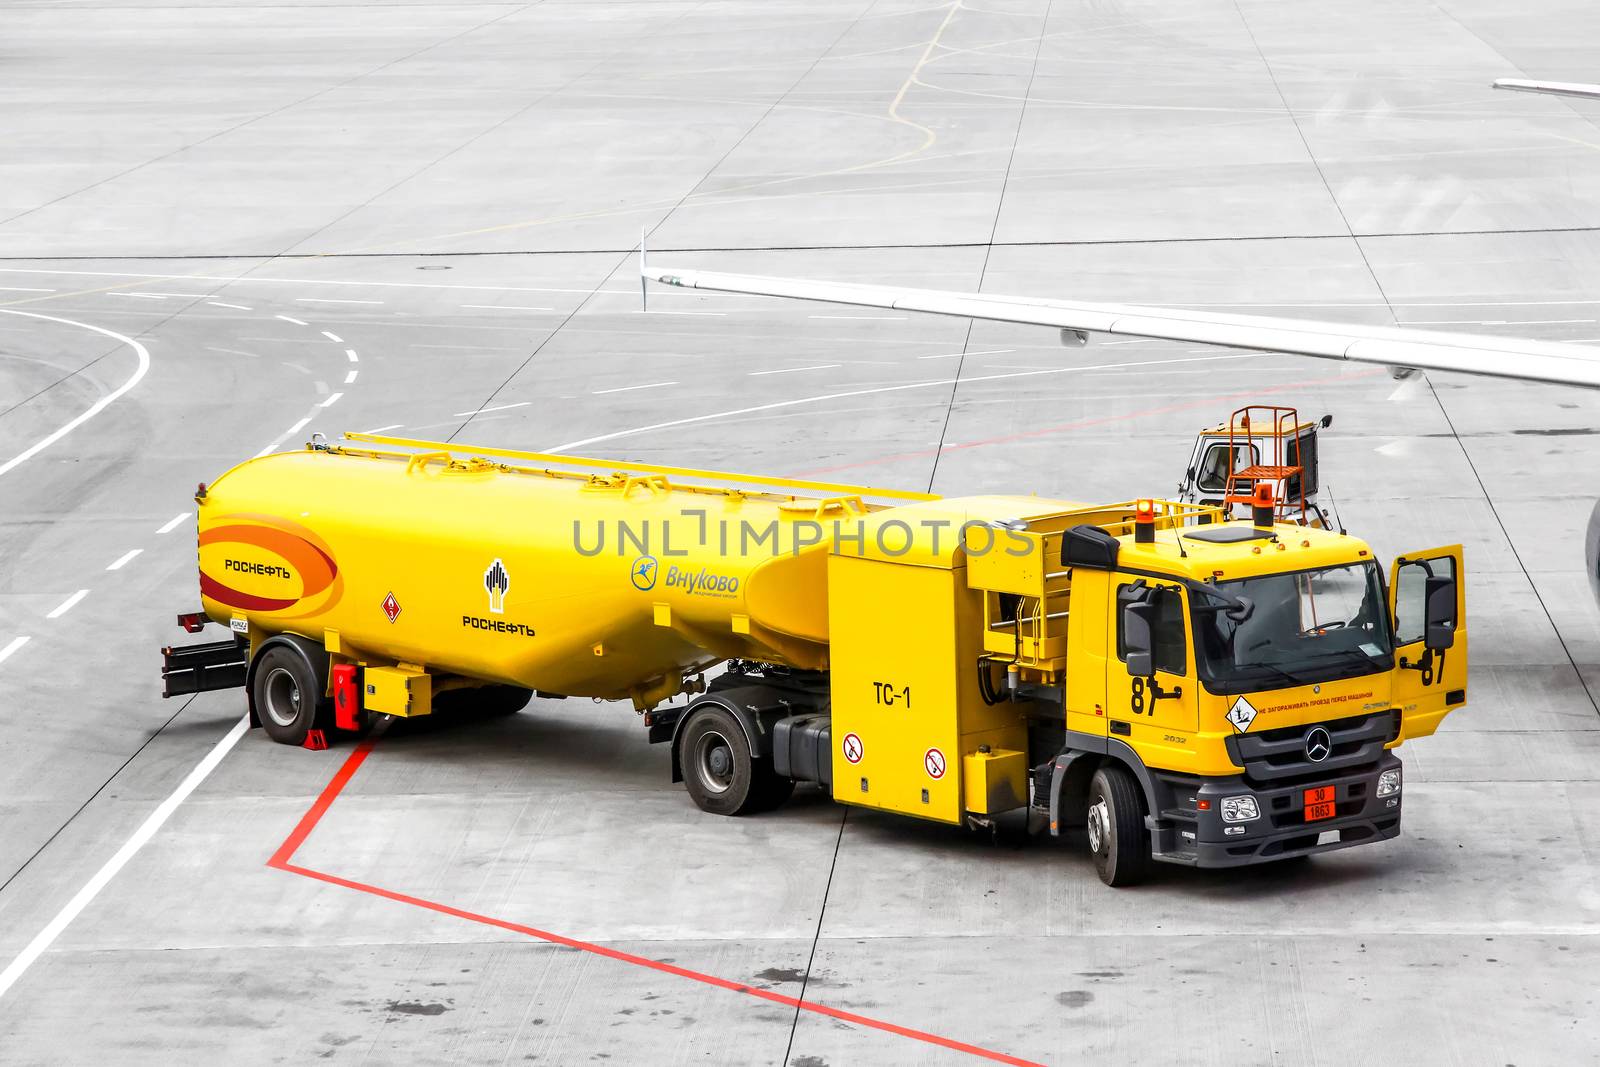 MOSCOW, RUSSIA - SEPTEMBER 9, 2013: Yellow fuel tank truck Mercedes-Benz Actros at the air field of the Vnukovo international airport.